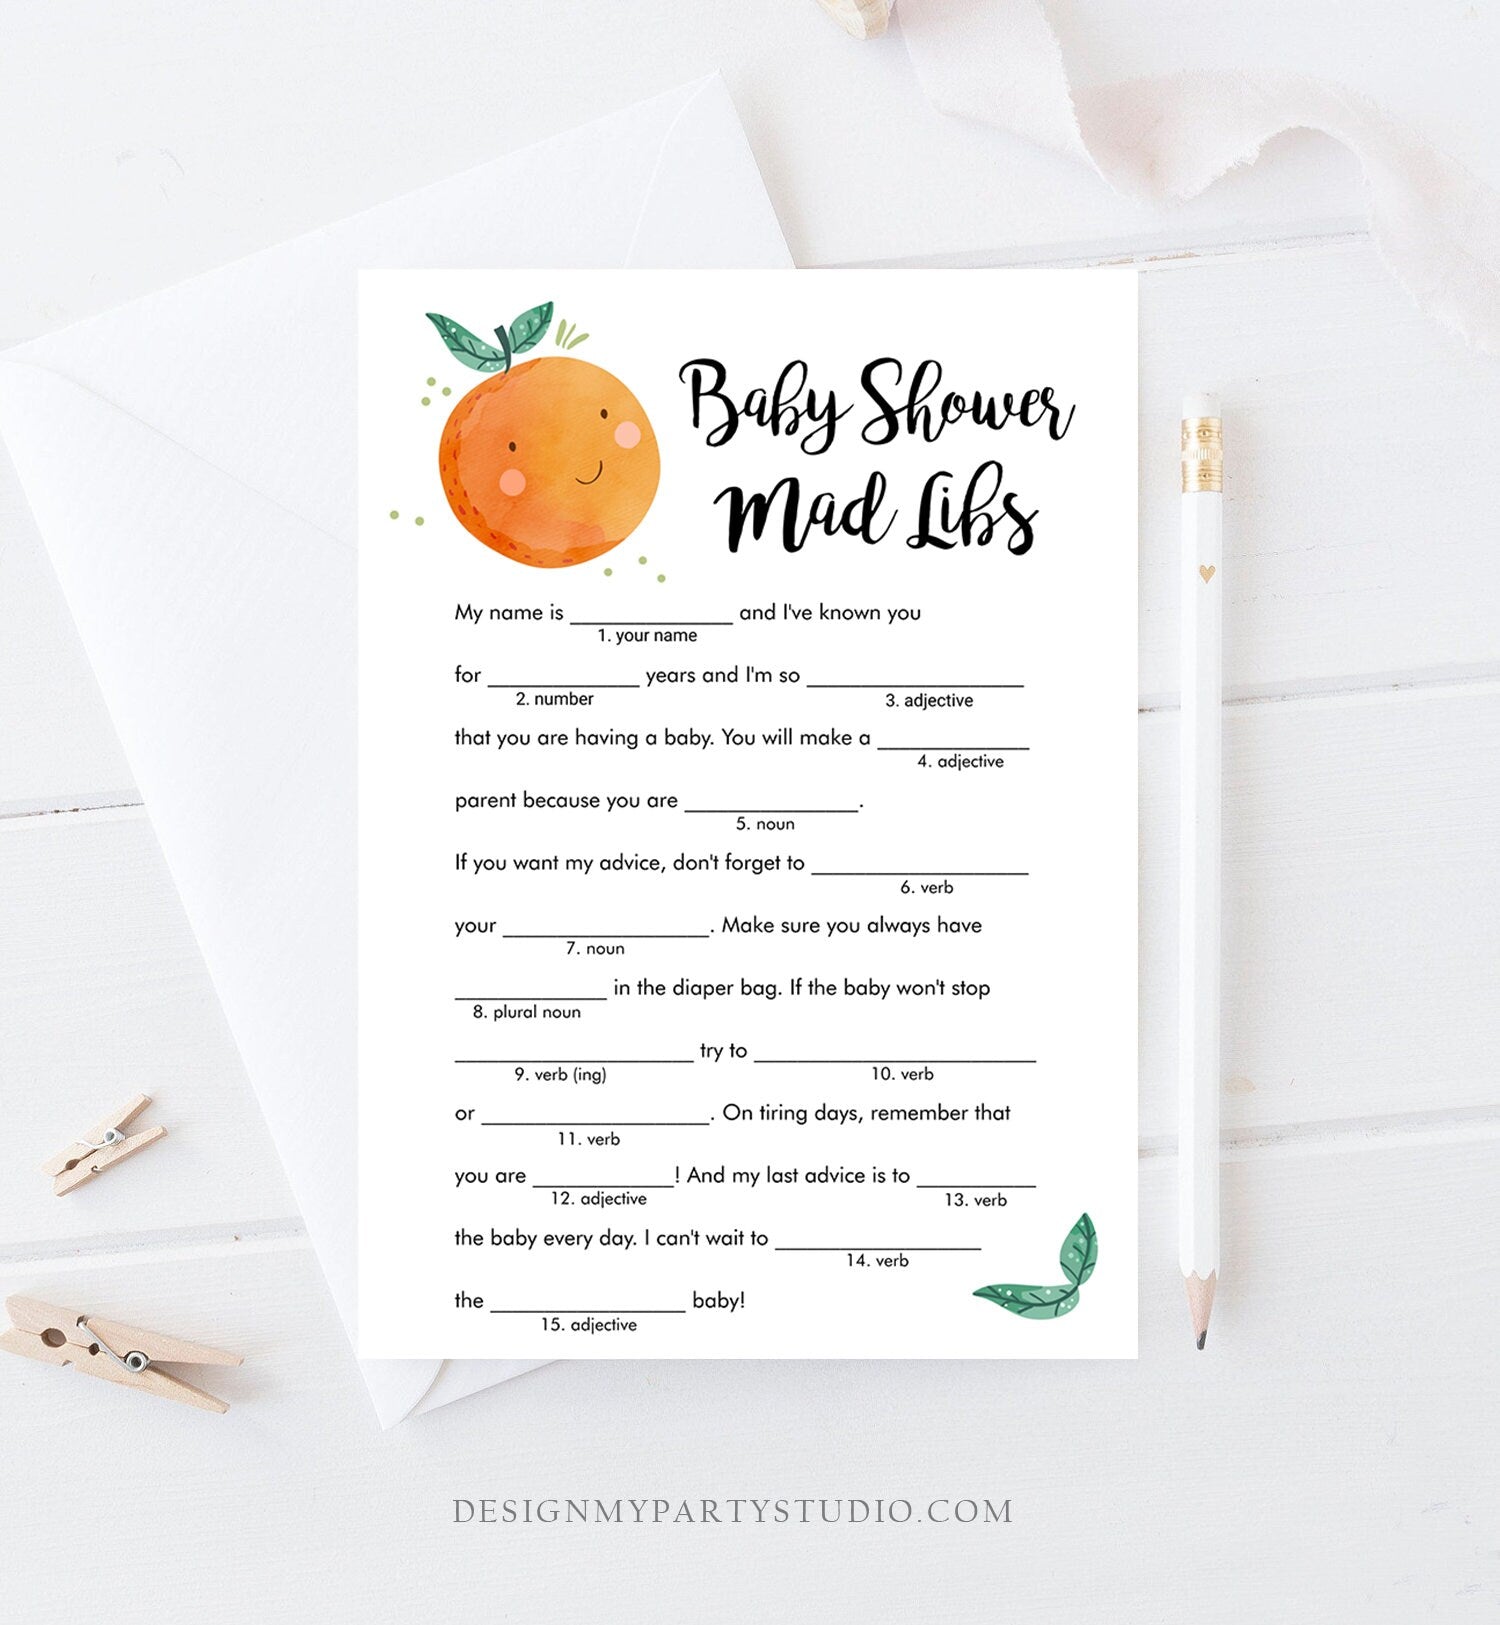 Editable Love Story Mad Libs Baby Shower Game Card Little Cutie Orange Clementine Sprinkle Activity Download Template Corjl 0330